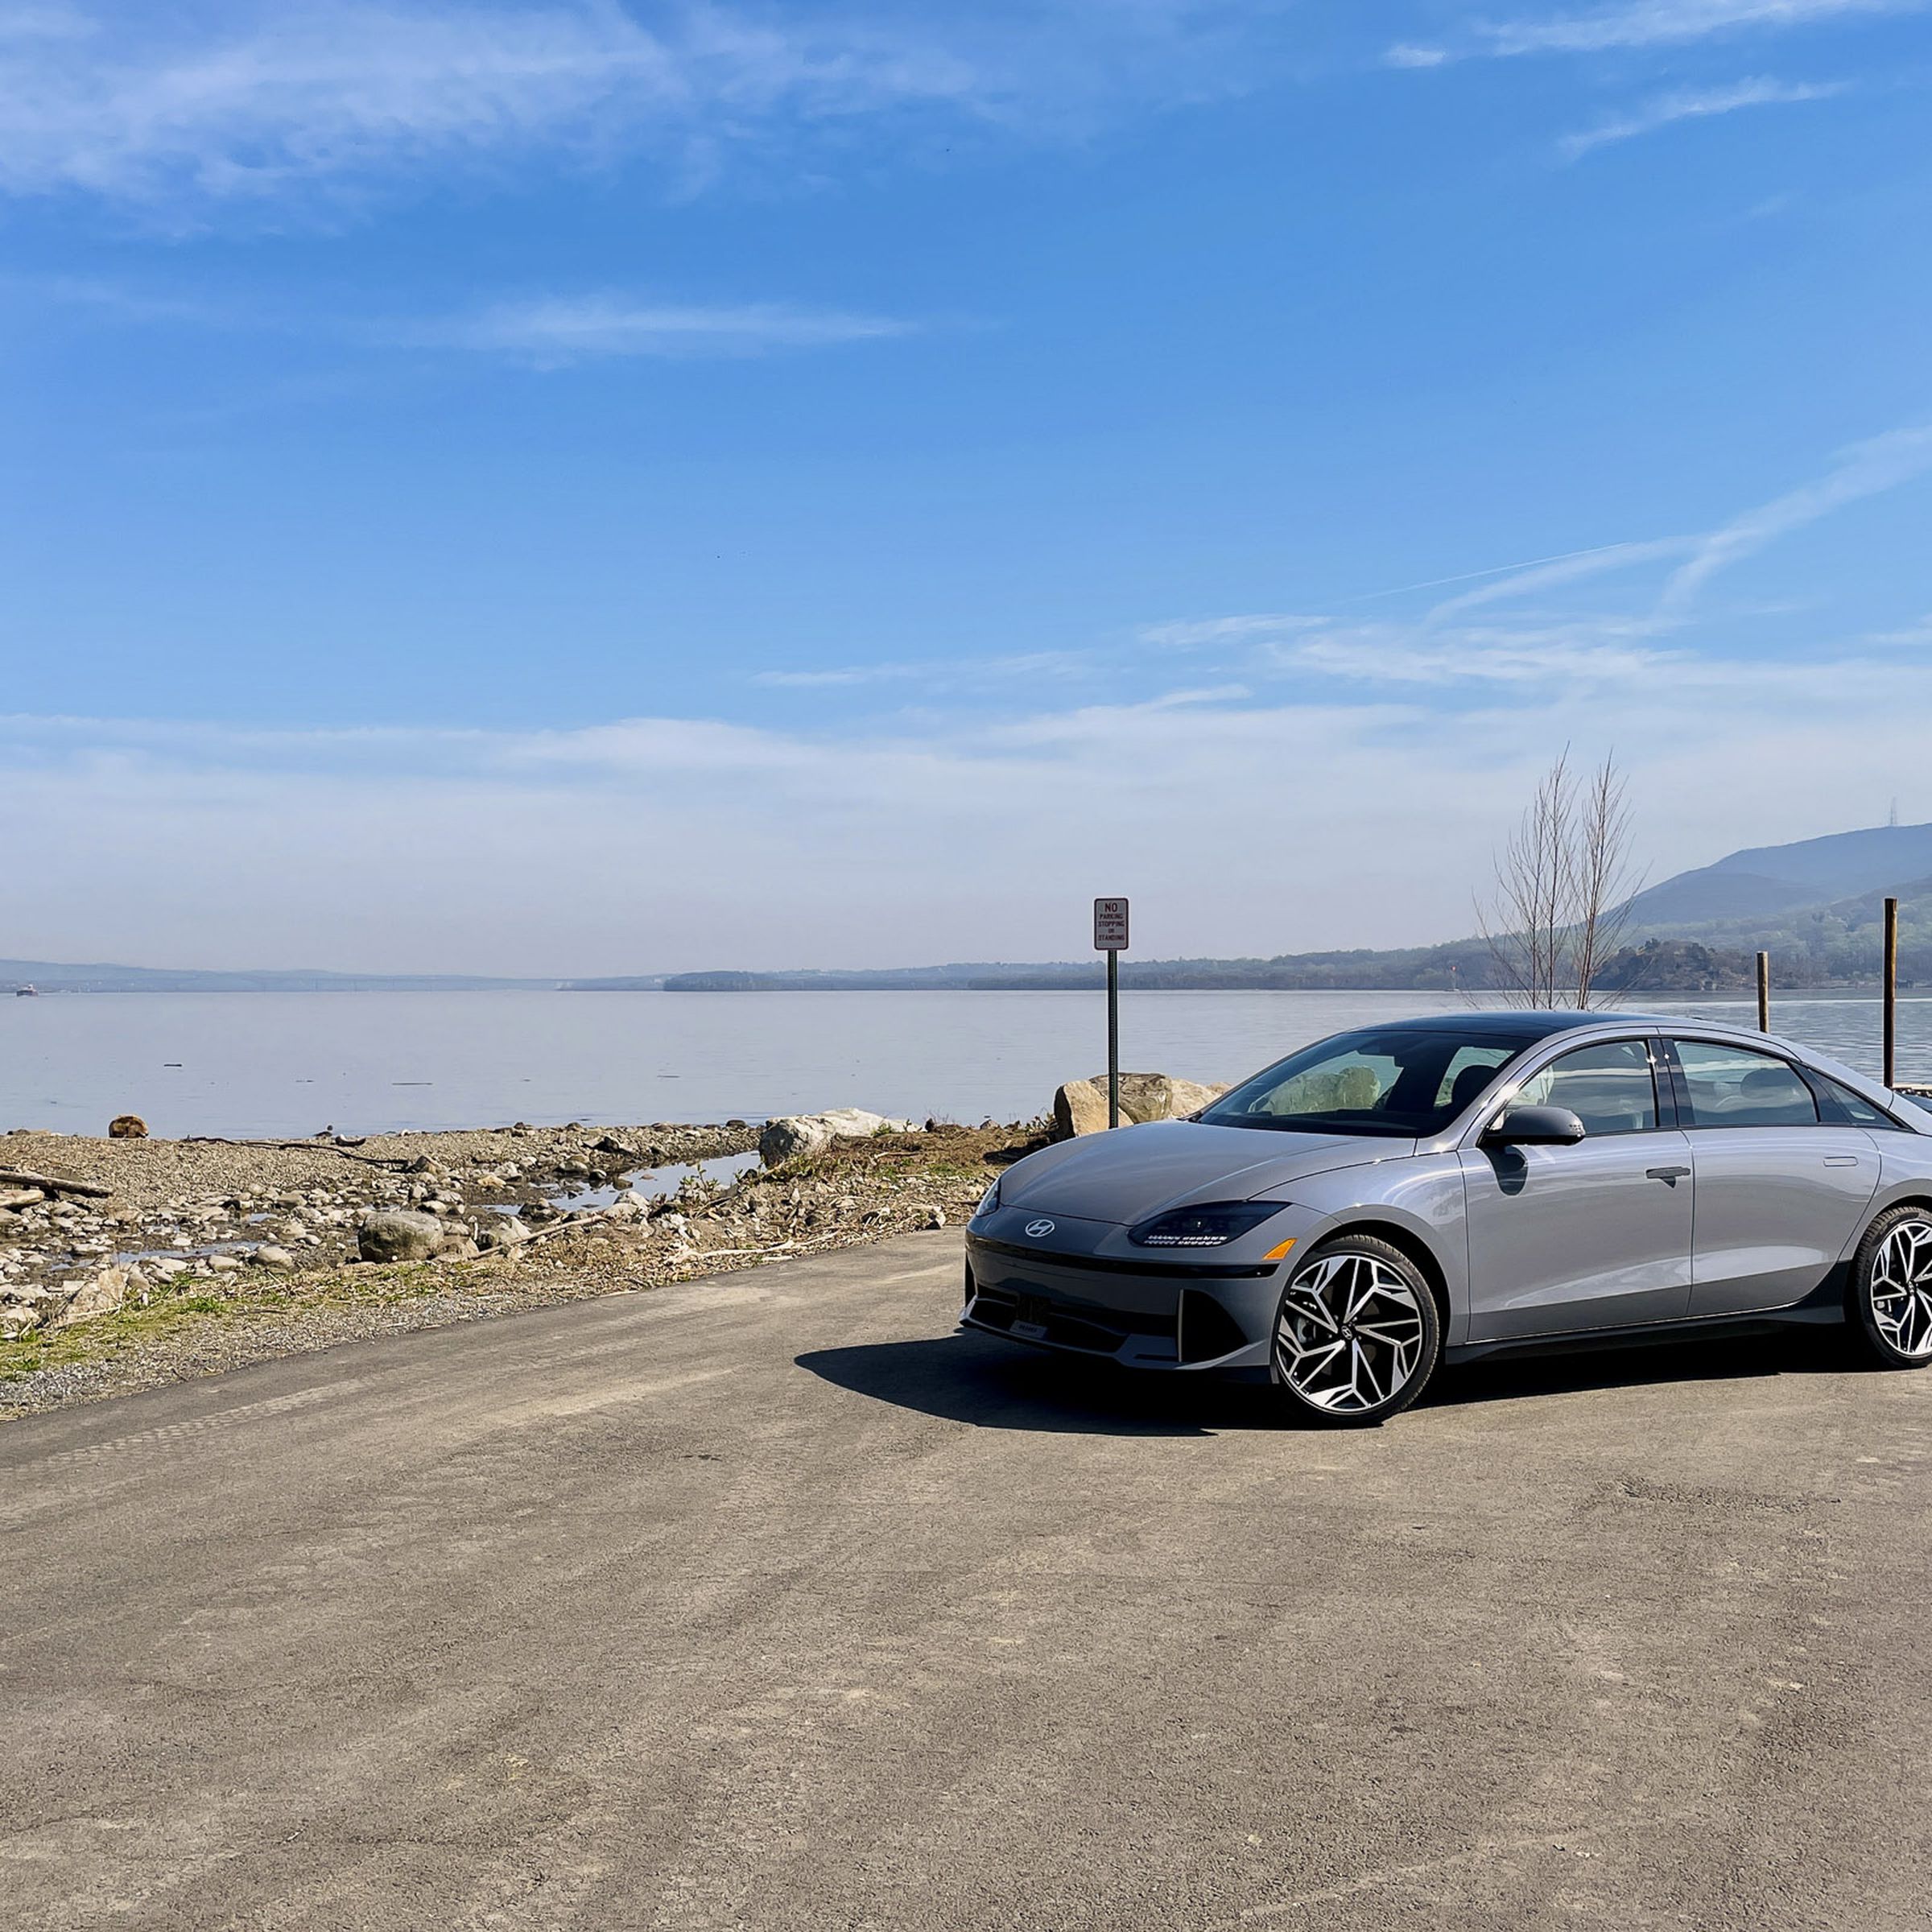 A Hyundai Ioniq 6 parked in front of a body of water